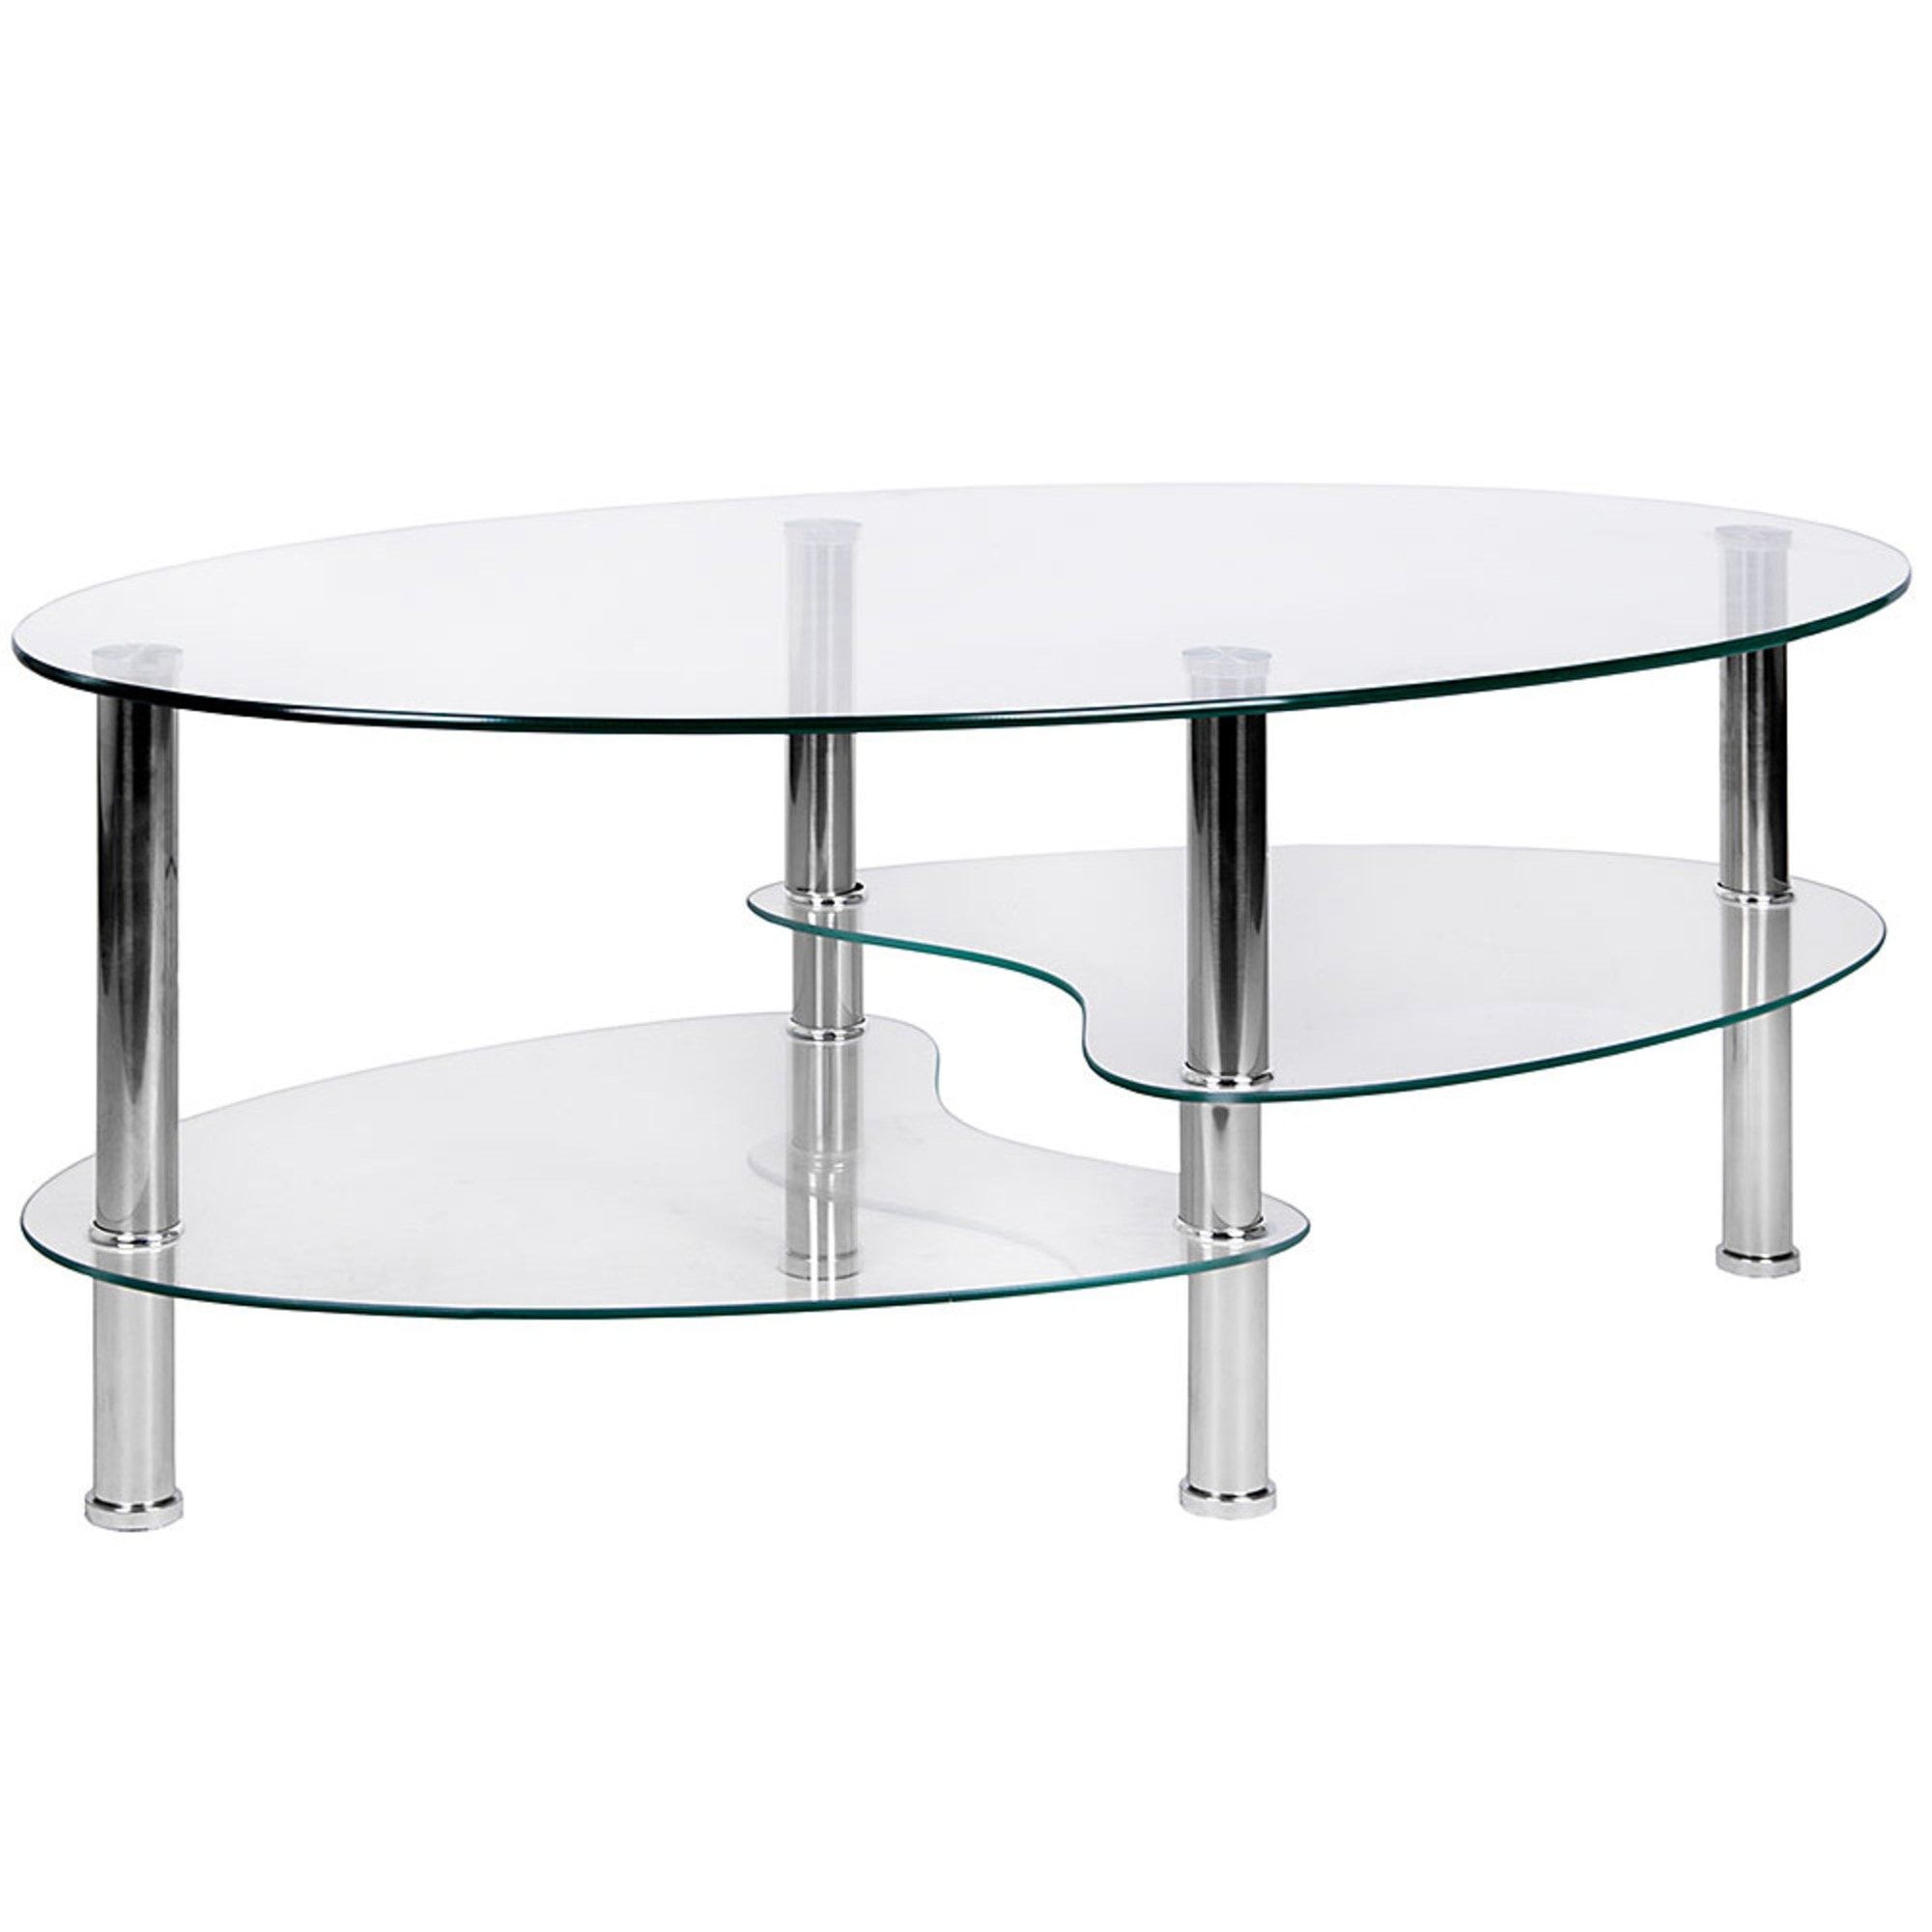 Cara Oval Clear Glass Coffee Table | Dining | Glass Furniture In Oval Glass Coffee Tables (View 14 of 15)